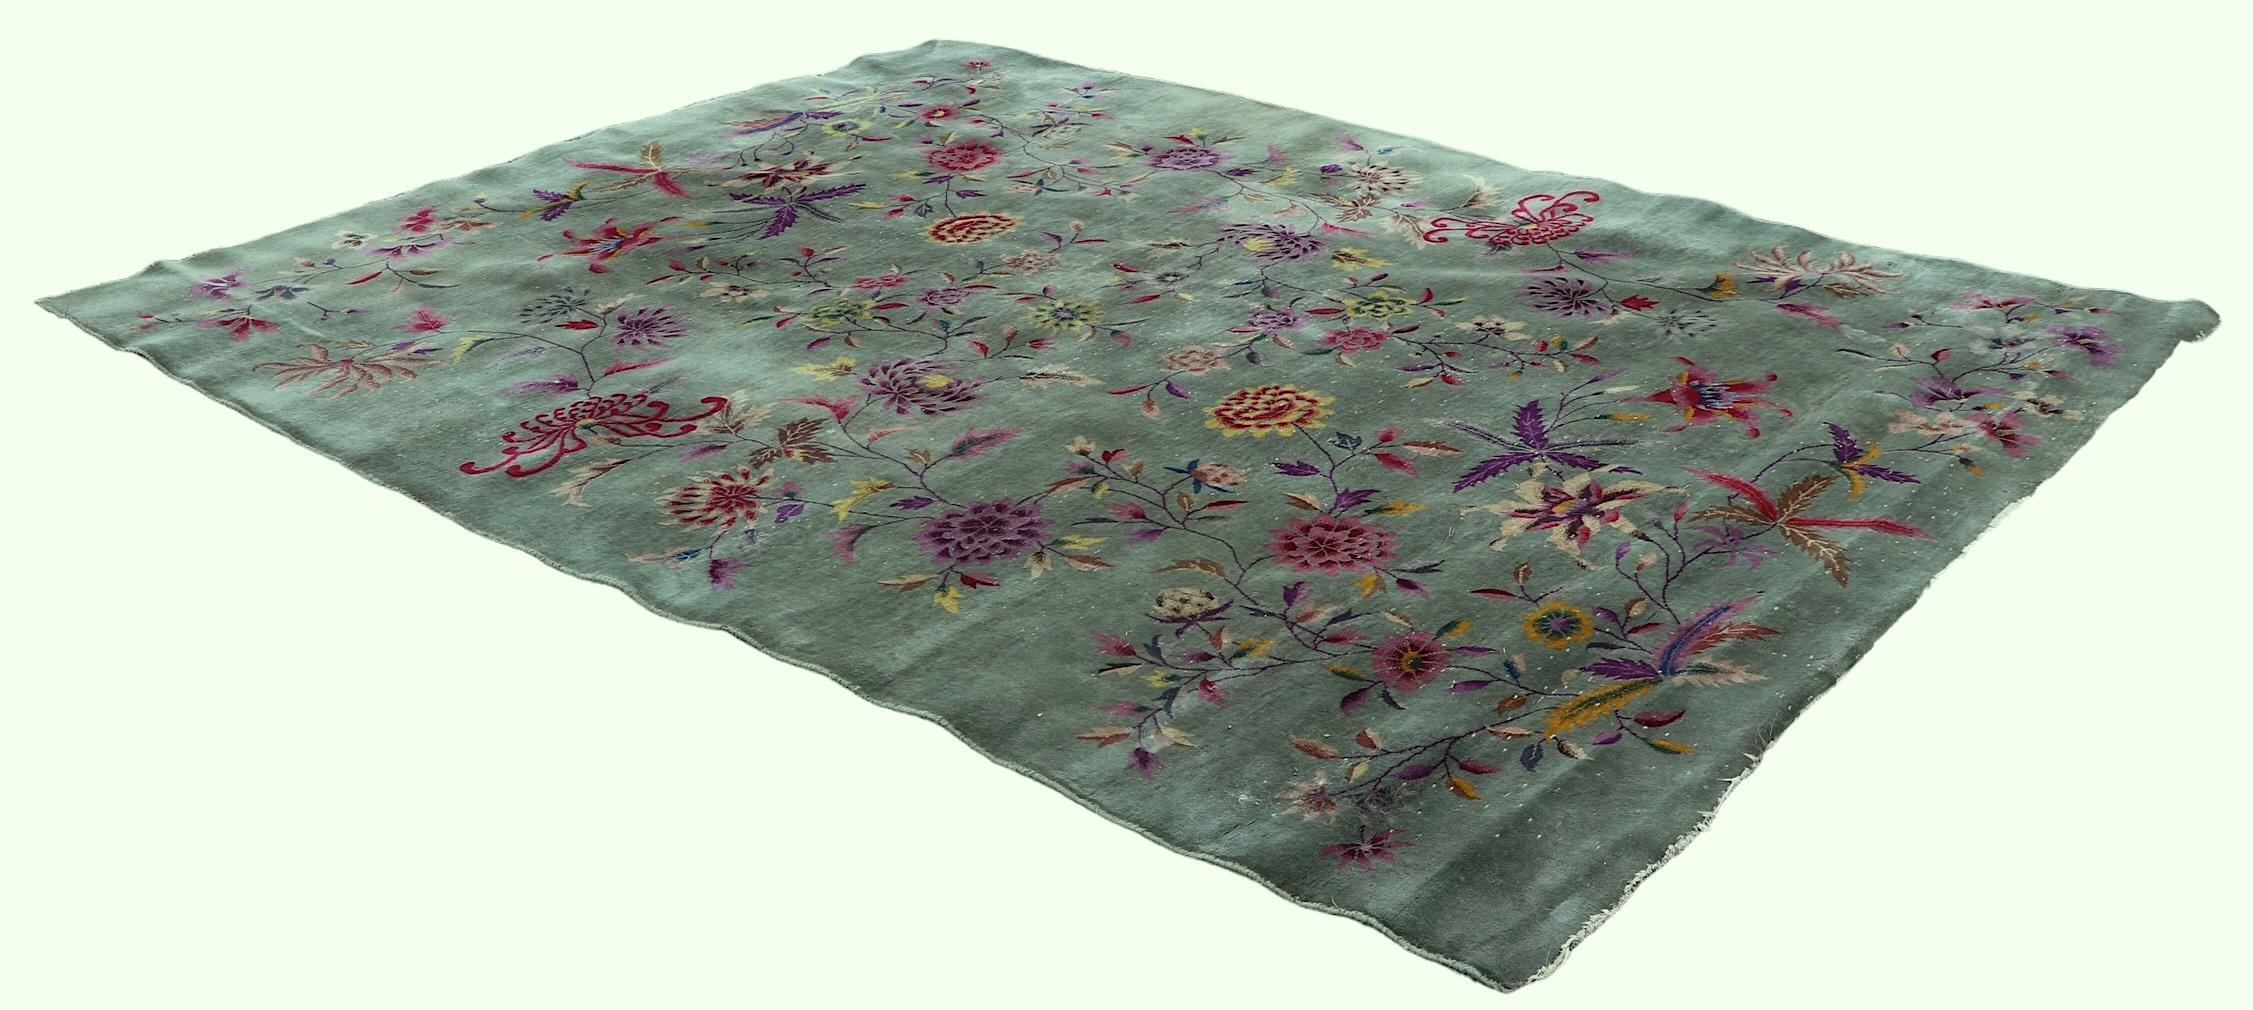 Art Deco Chinese Rug with Floral Motif c. 1920/1930's For Sale 11